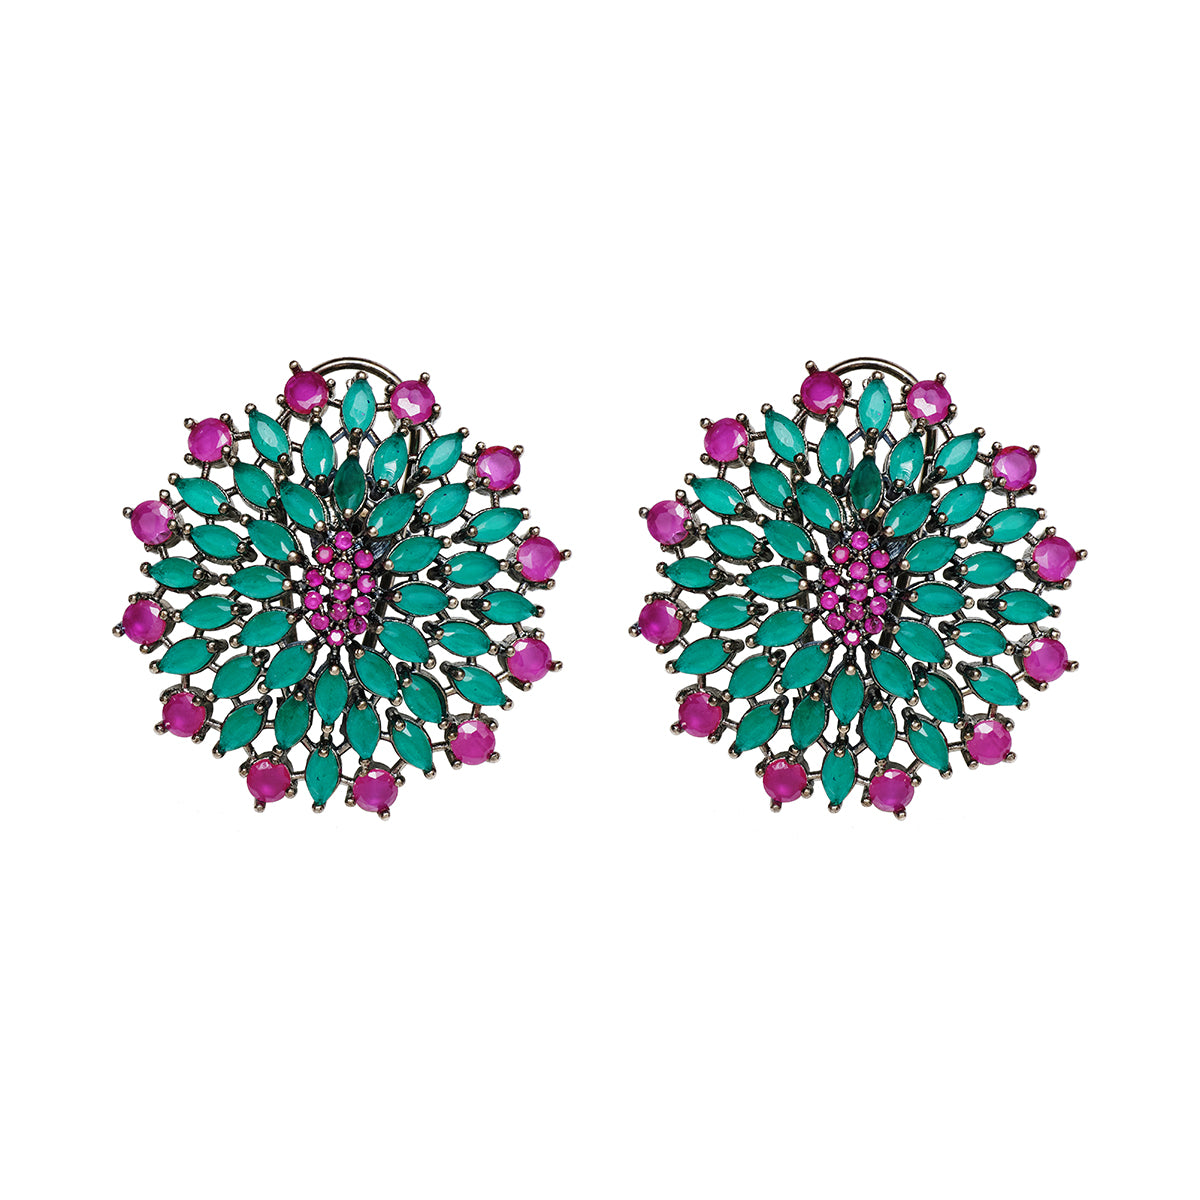 pink and green stud earrings. Mayilamma Stud earrings from Maheswary Collection by Veronica Tharmalingam